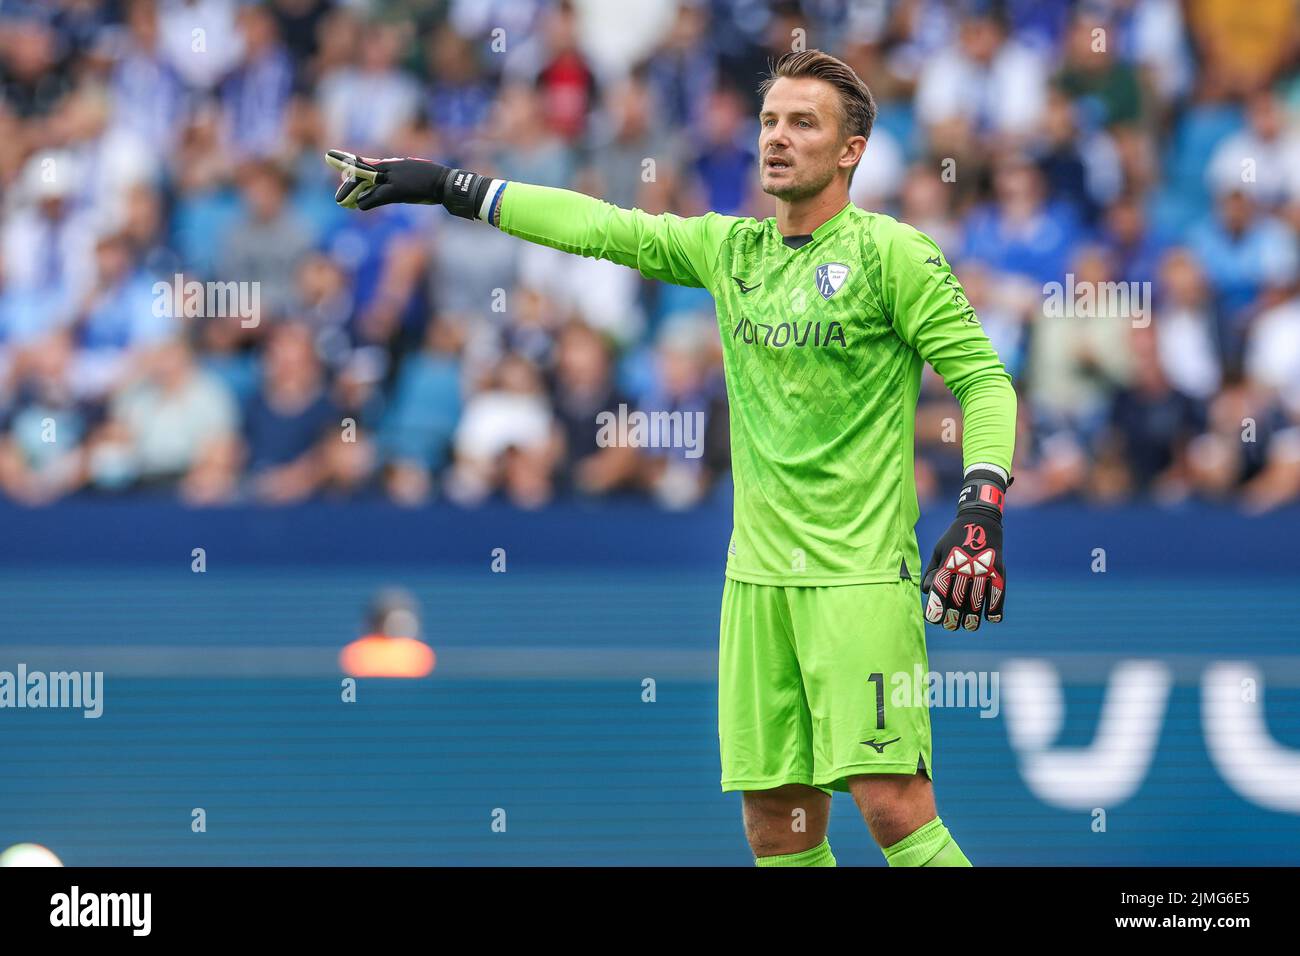 06 August 2022, North Rhine-Westphalia, Bochum: Soccer: Bundesliga, VfL Bochum - FSV Mainz 05, Matchday 1, Vonovia Ruhrstadion. Goalkeeper Manuel Riemann from Bochum gives instructions to his teammates. Photo: Tim Rehbein/dpa - IMPORTANT NOTE: In accordance with the requirements of the DFL Deutsche Fußball Liga and the DFB Deutscher Fußball-Bund, it is prohibited to use or have used photographs taken in the stadium and/or of the match in the form of sequence pictures and/or video-like photo series. Stock Photo